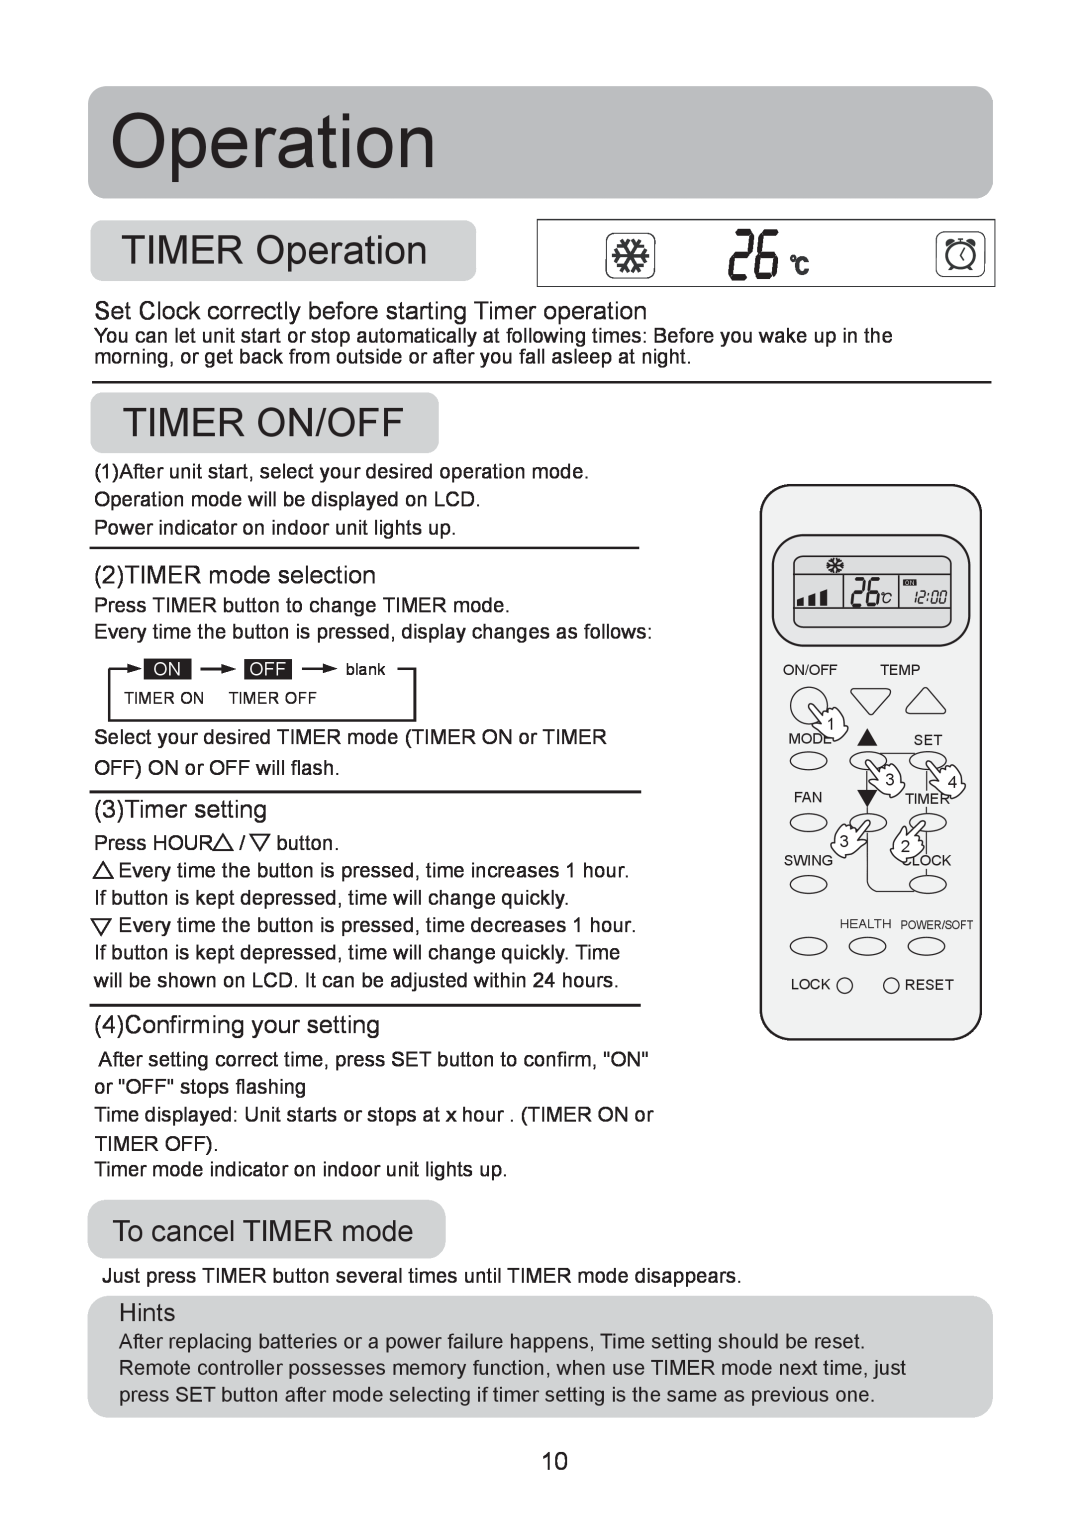 Haier 0010518526 To cancel TIMER mode, 2TIMER mode selection, 3Timer setting, 4Confirming your setting, Operation, Hints 